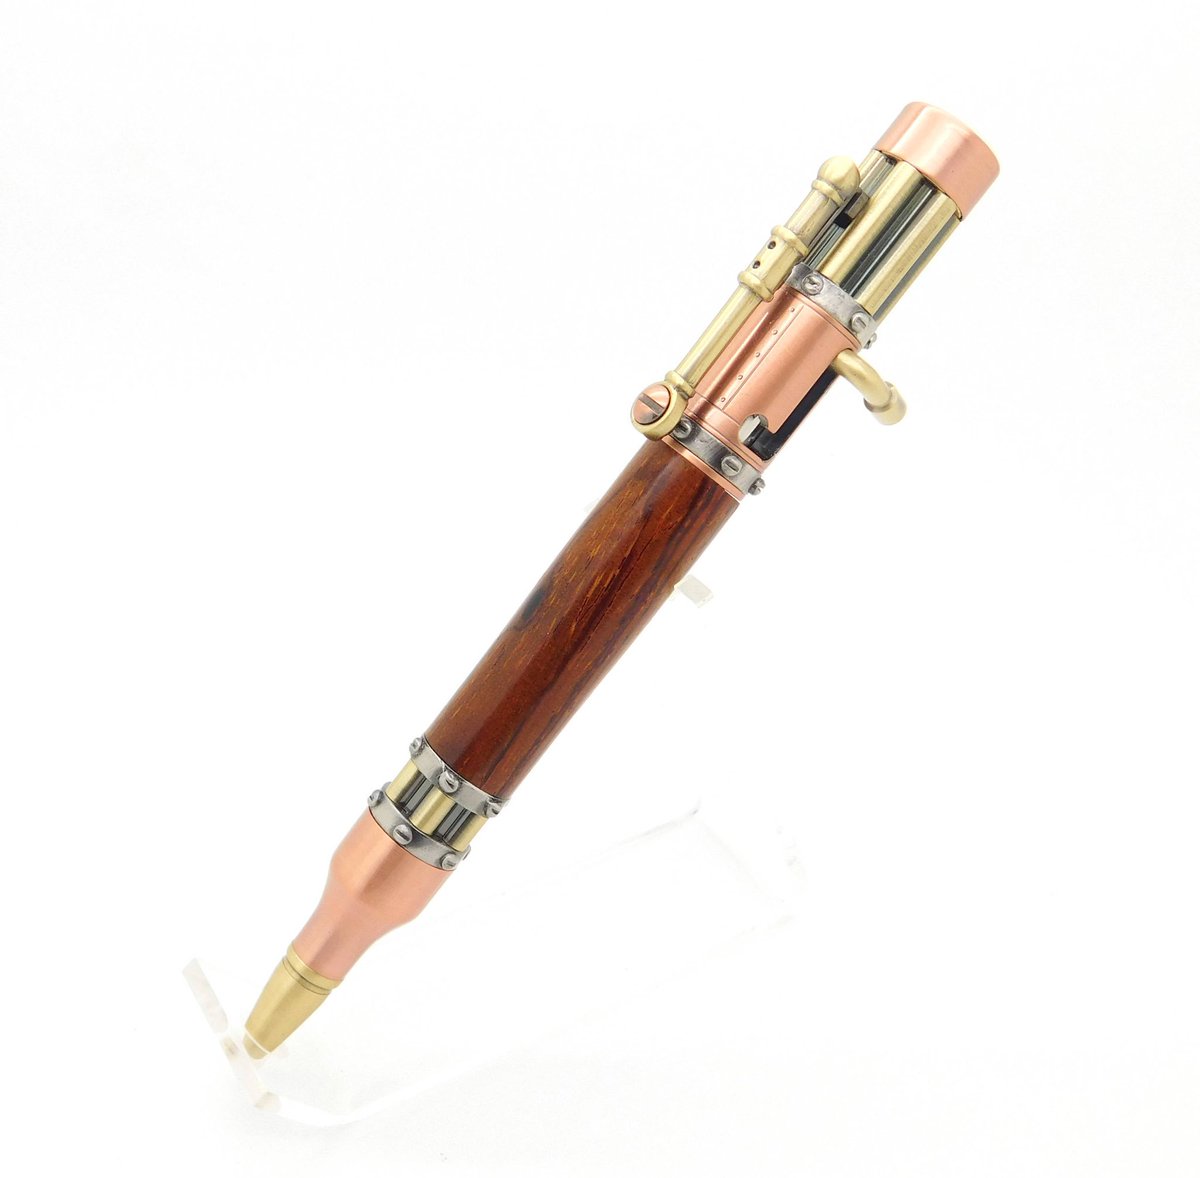 #Handcrafted #Steampunk Copper Bolt Action Pen featuring #Cocobolo  etsy.me/2JBsb8q #giftideas
#5thAnniversary #FathersDay #gatlinggun #copper #giftforhim #deskaccessory #officepen #bossgift